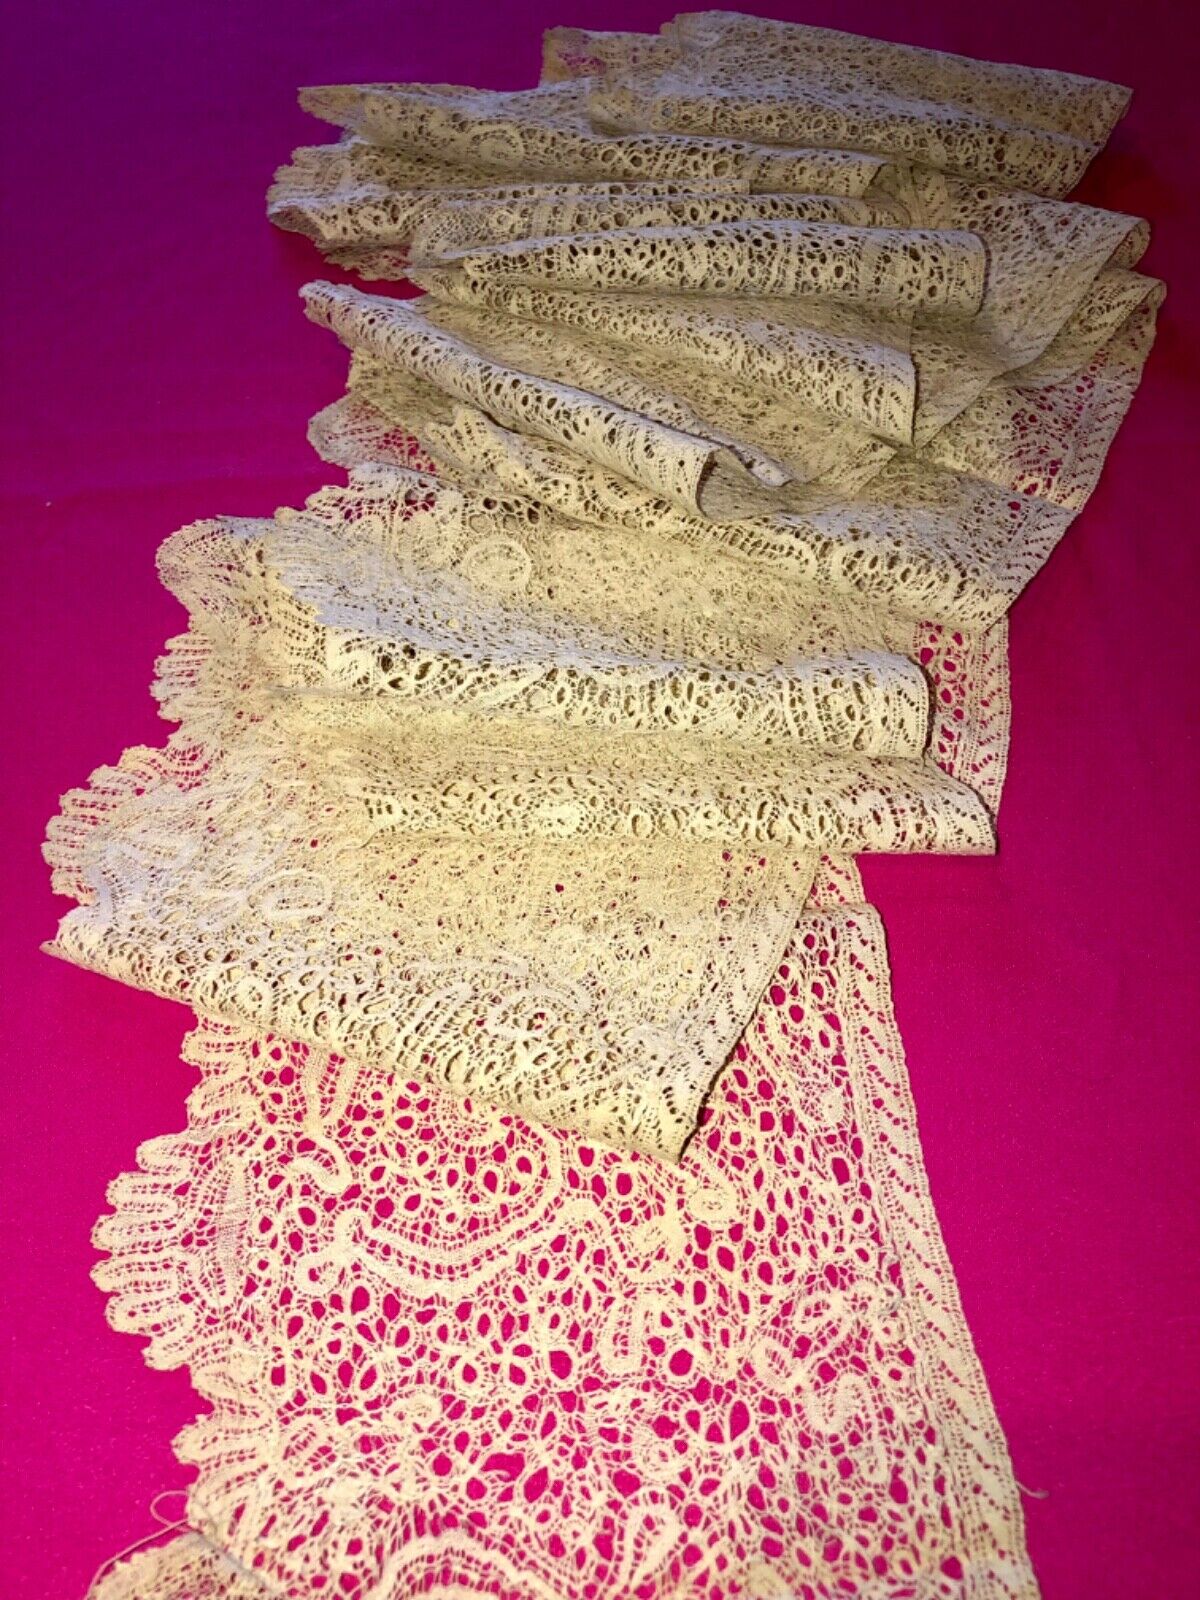 Antique late 17th early 18th DUTCH FLEMISH BRABANT gown LACE 4 Yards